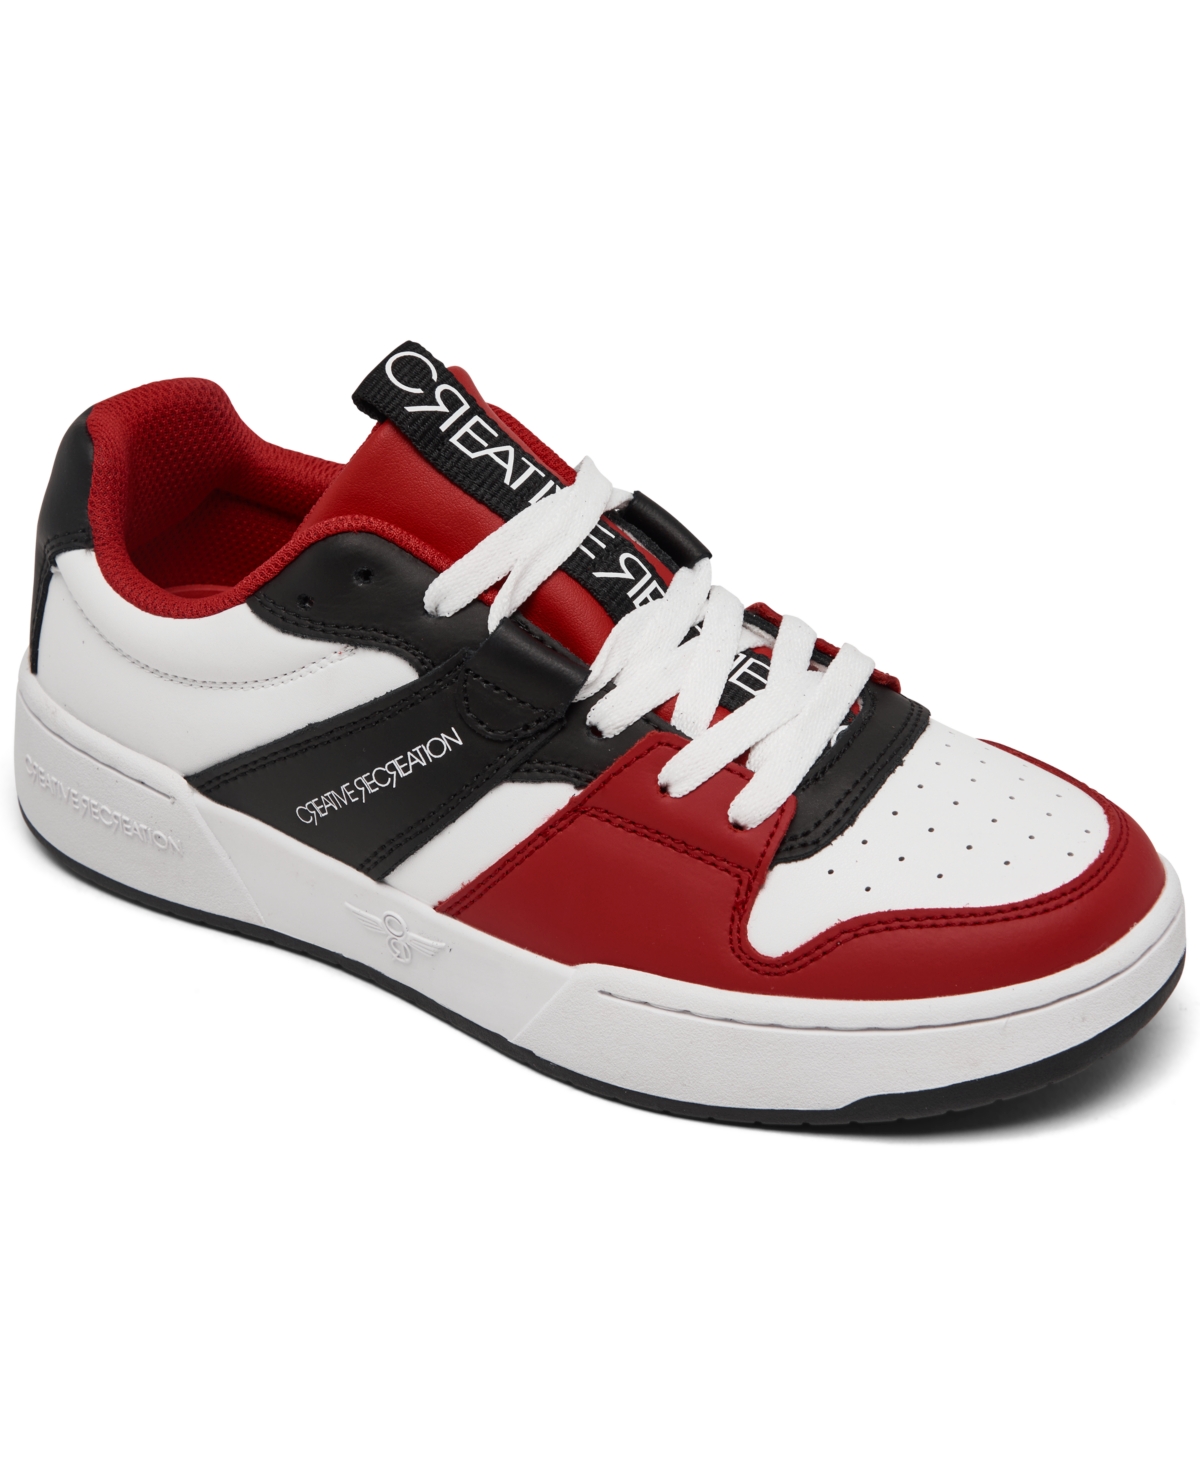 Creative Recreation Women's Janae Low Casual Sneakers From Finish Line In White,black,red